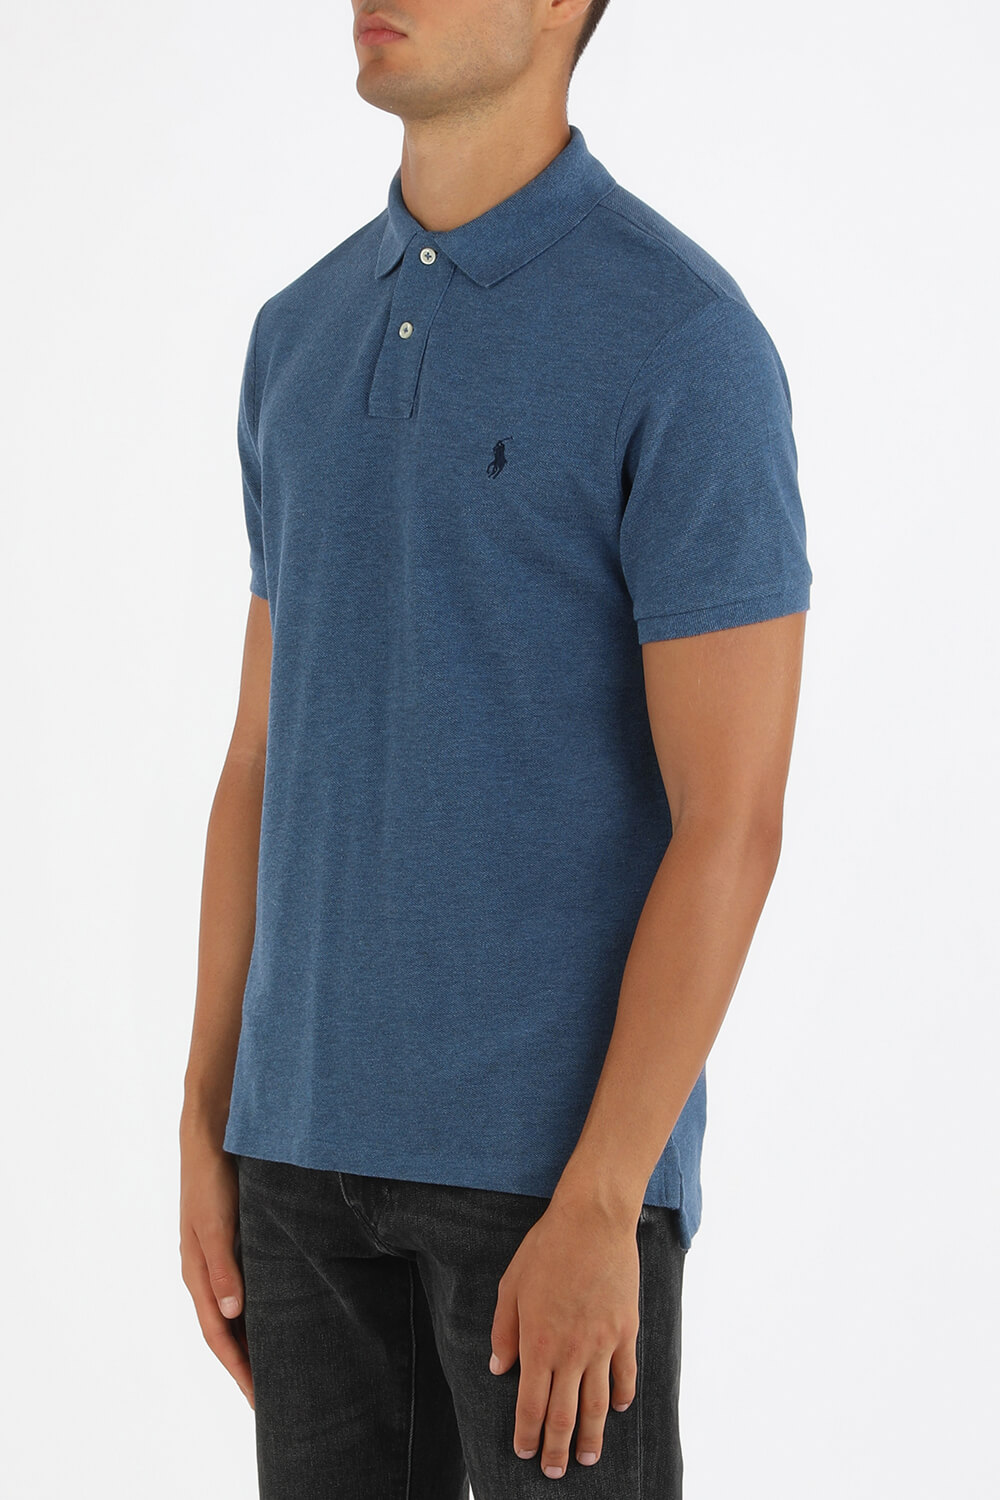 Short Sleeves Knit Polo Shirt in Royal Blue POLO RALPH LAUREN